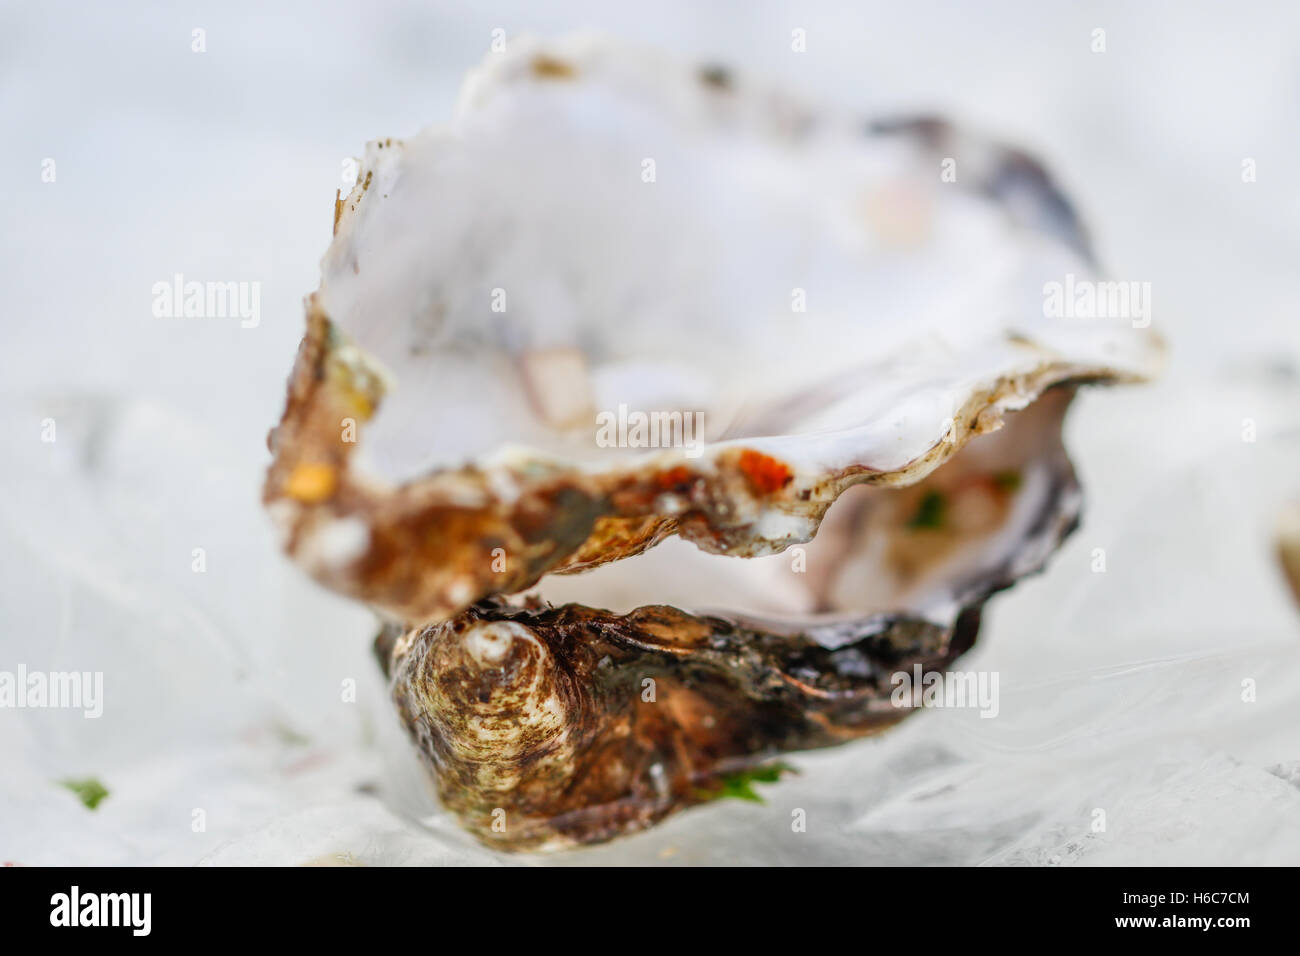 Oysters ready to eat. Stock Photo